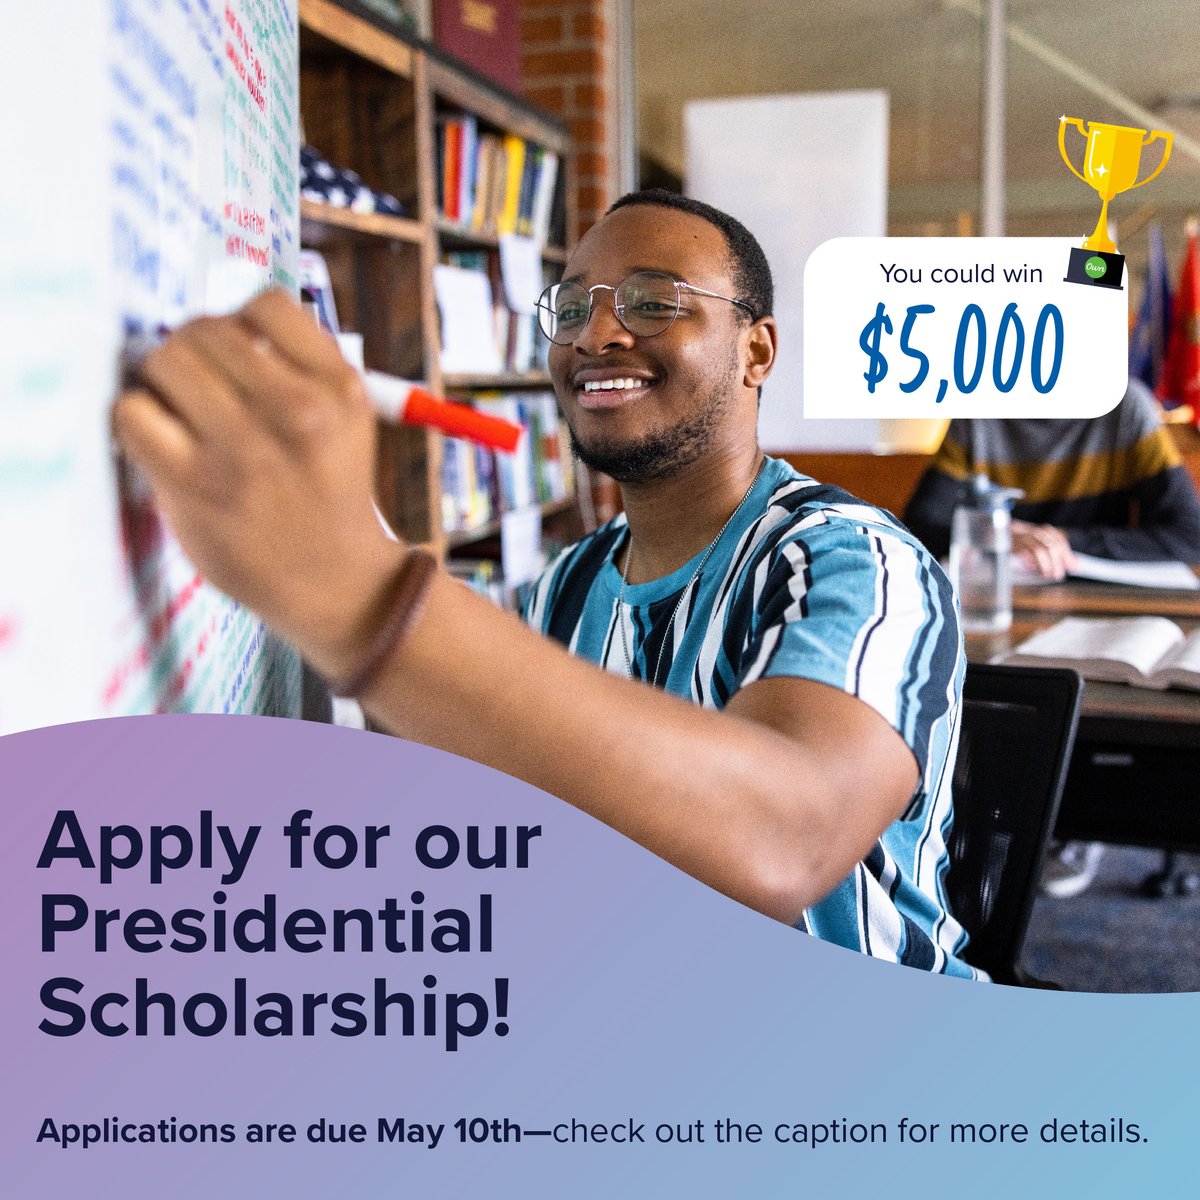 Reminder ❗ We’re still accepting applications for our Presidential Scholarship! The Presidential Scholarship awards a $5,000 to a high school senior who plans to major in business. Visit georgiasownfoundation.org/scholarships for full rules and details, and to submit your application today!